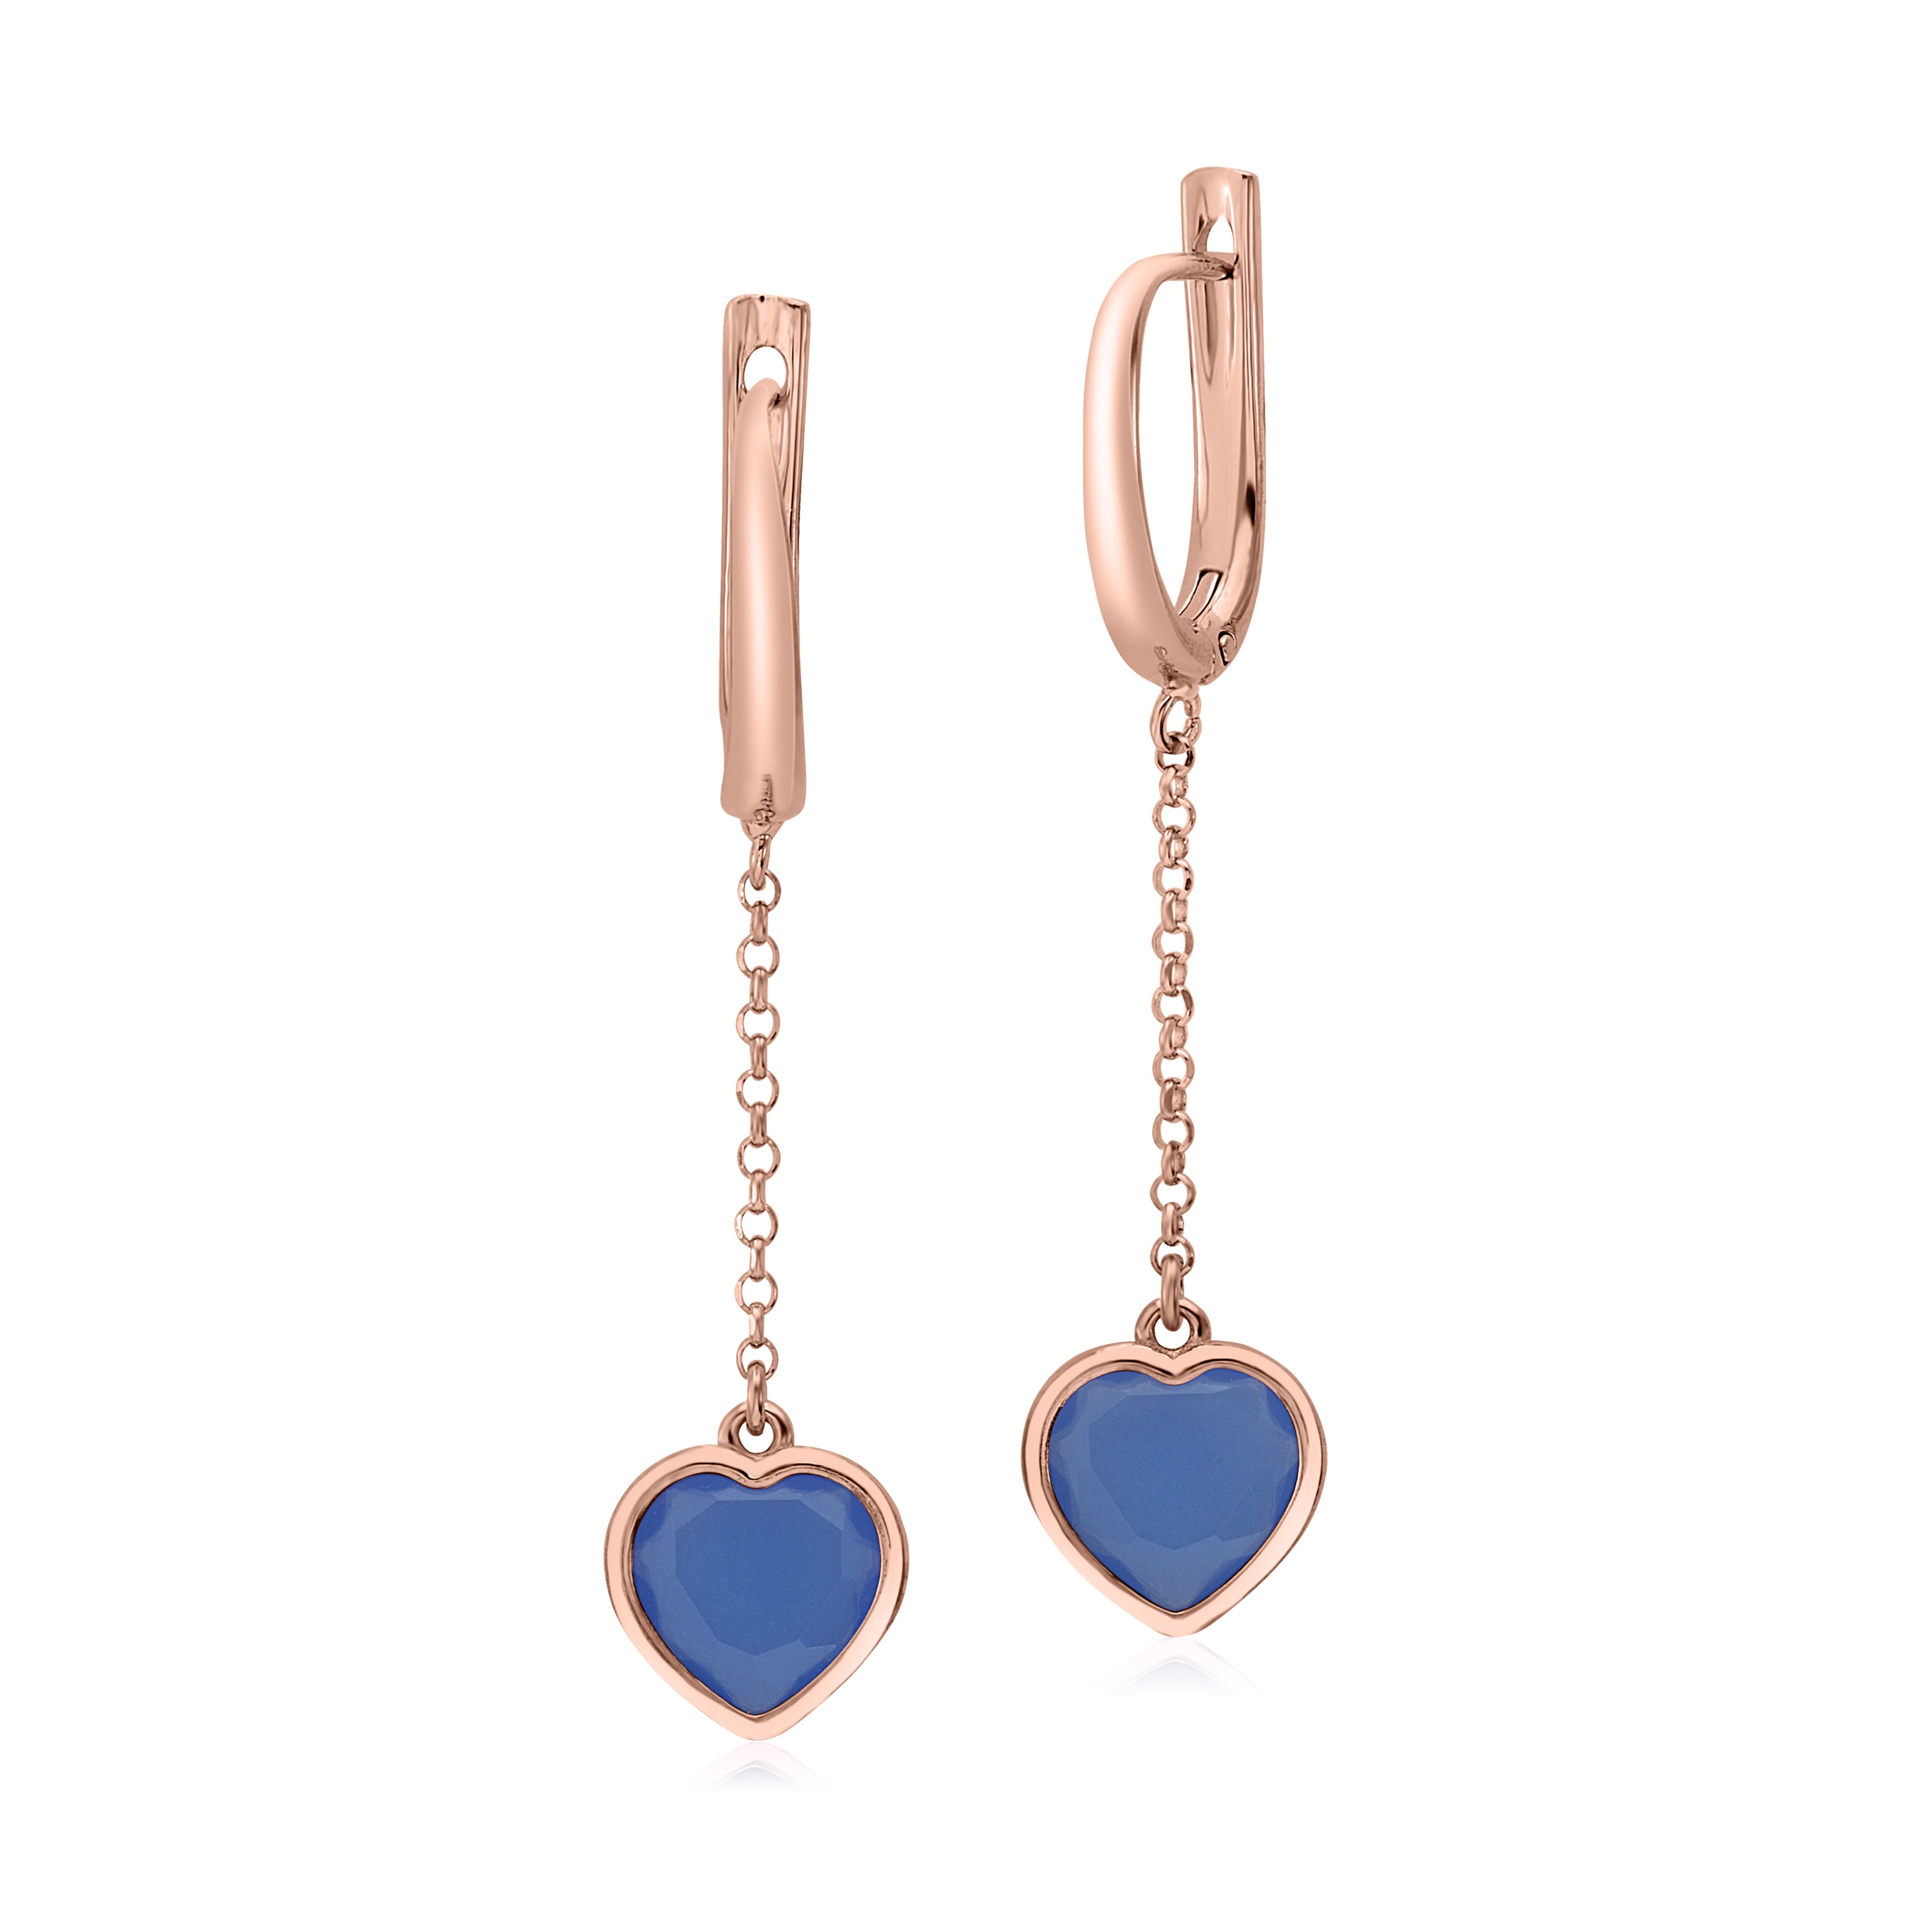 UNICORNJ Sterling Silver Rose Gold Plated Heart Leverback Earrings Long Dangle Drop with Simulated Stone